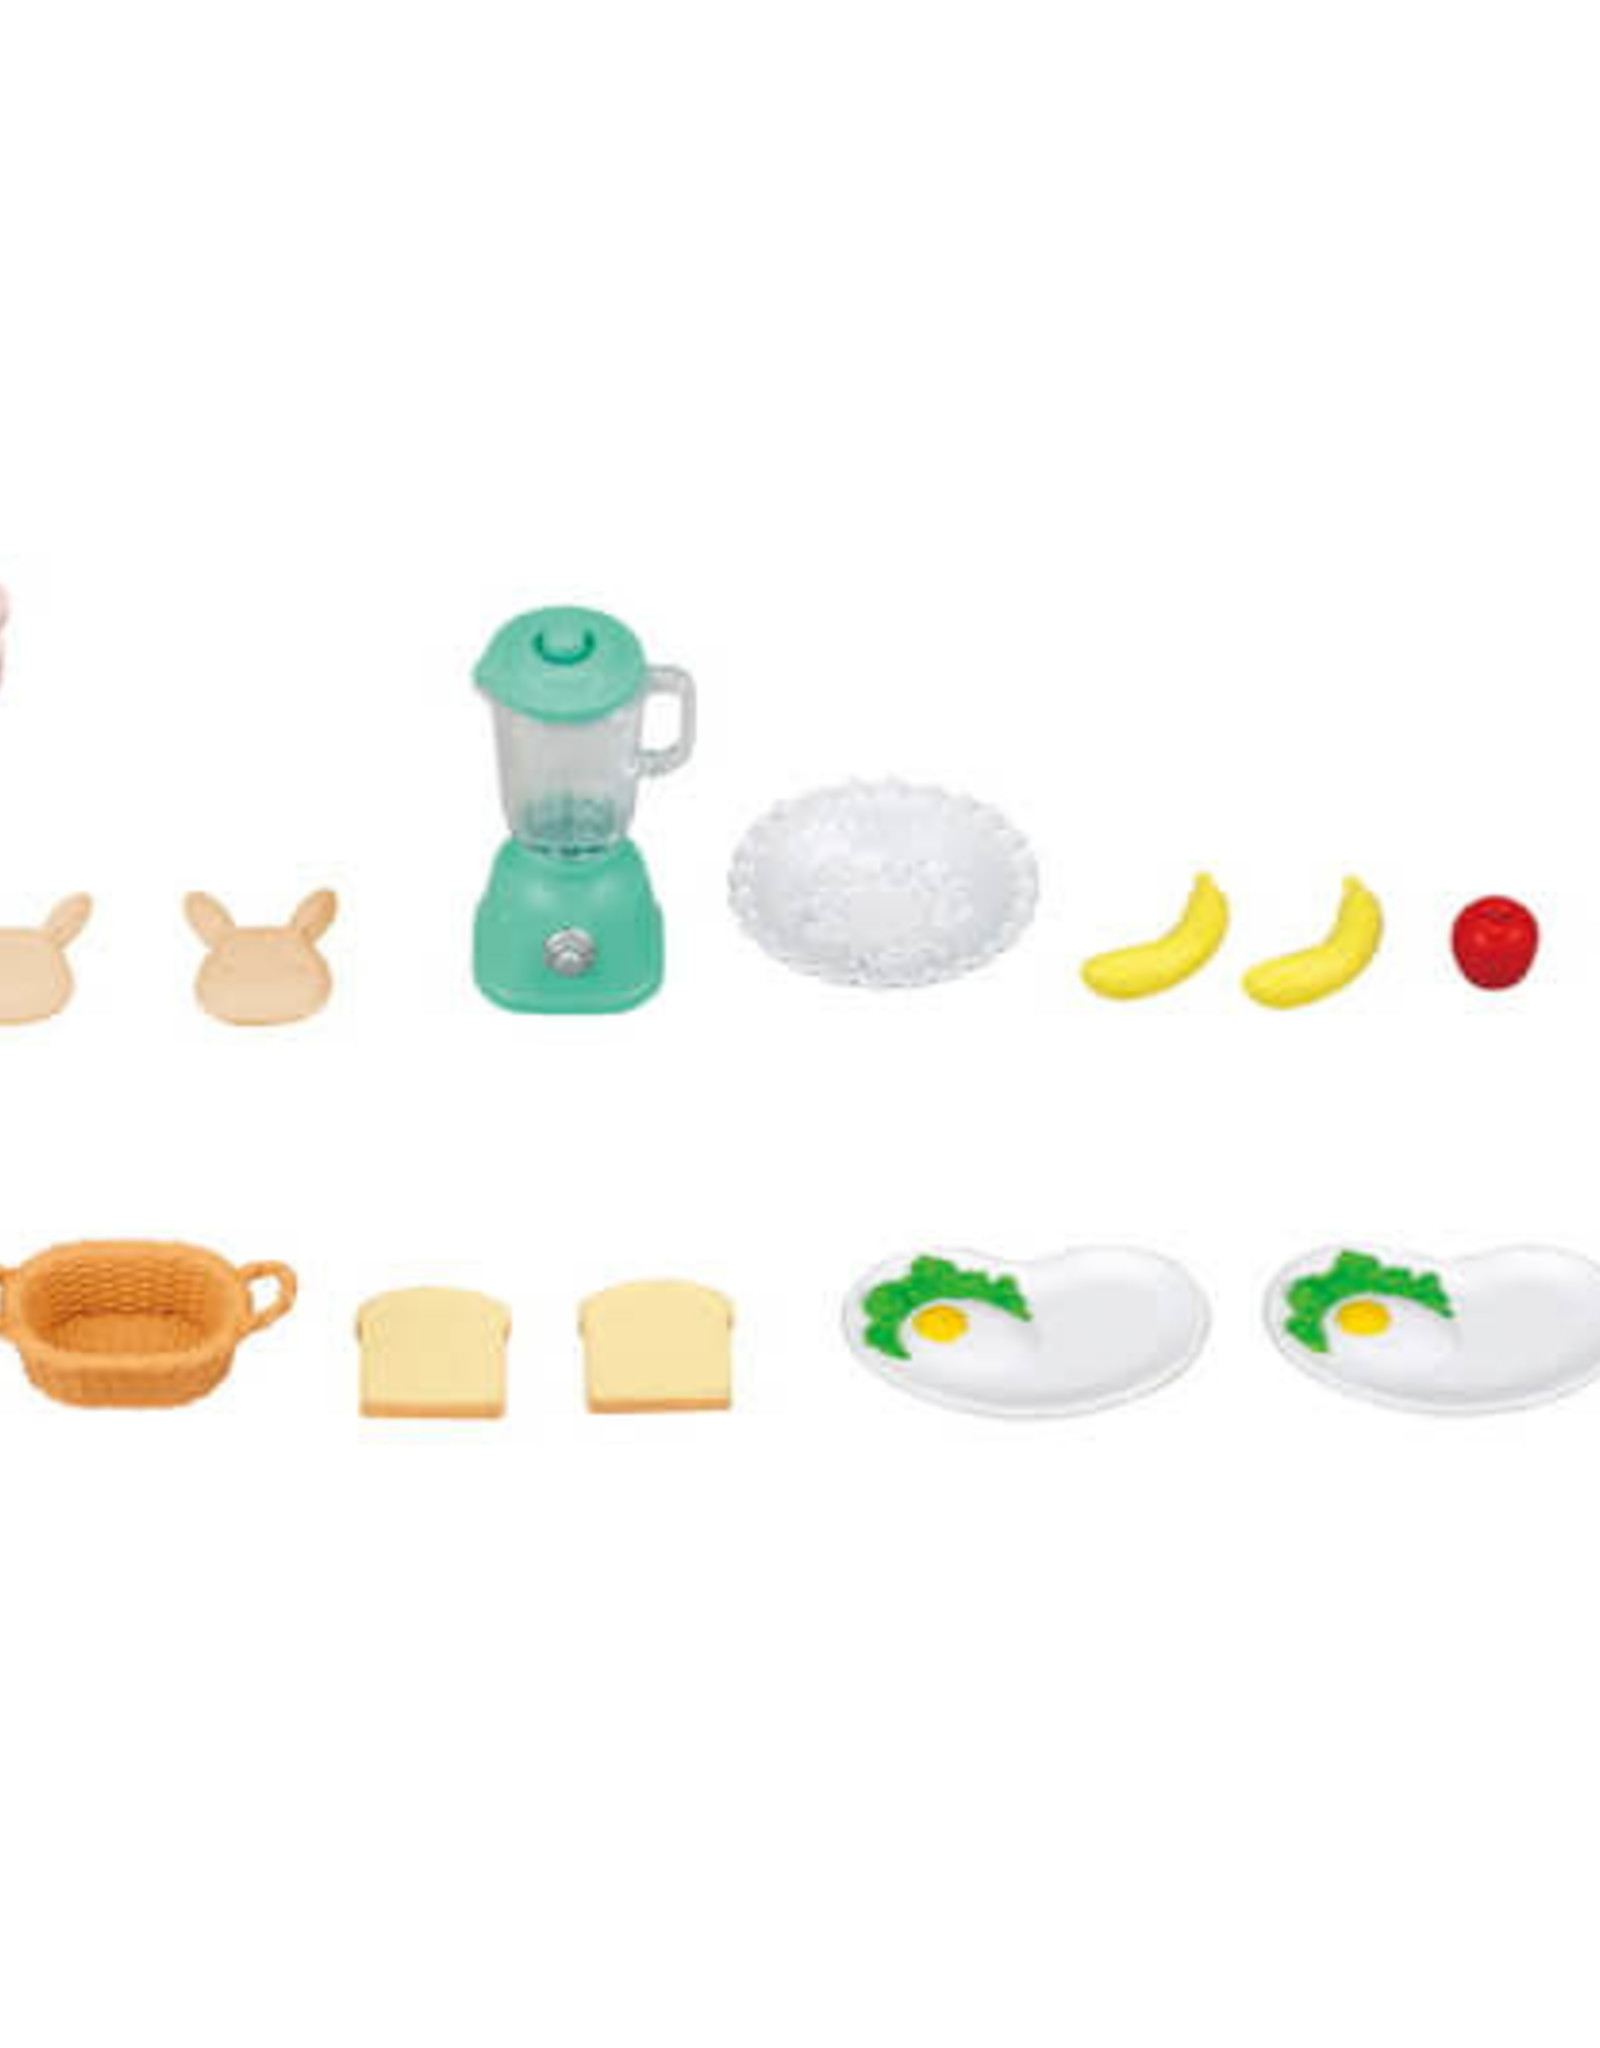 Calico Critters CC Breakfast Playset